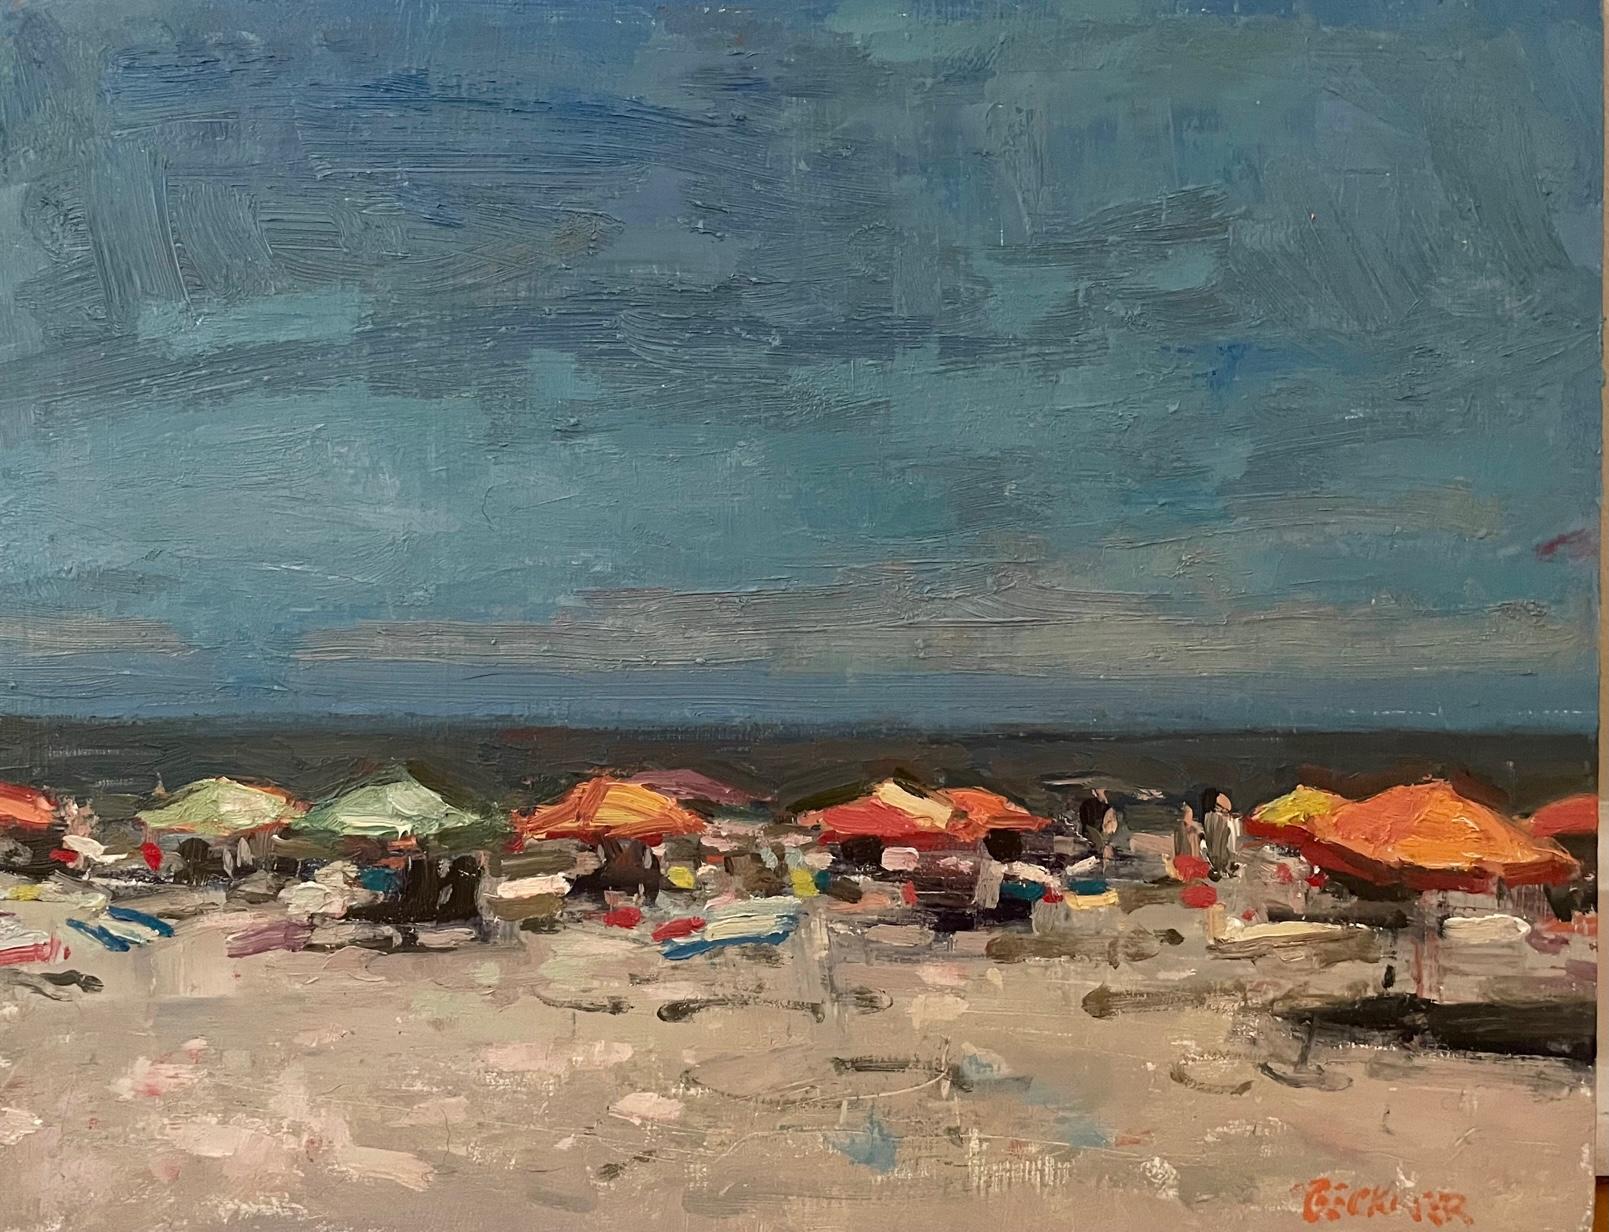 Afternoon at the Beach is an example of the bright colors that Beckner uses in his paintings. The orange umbrella paintings were painted at Hilton Head, South Carolina. Jim Beckner just finished a series of beach paintings at Hilton Head.. All of